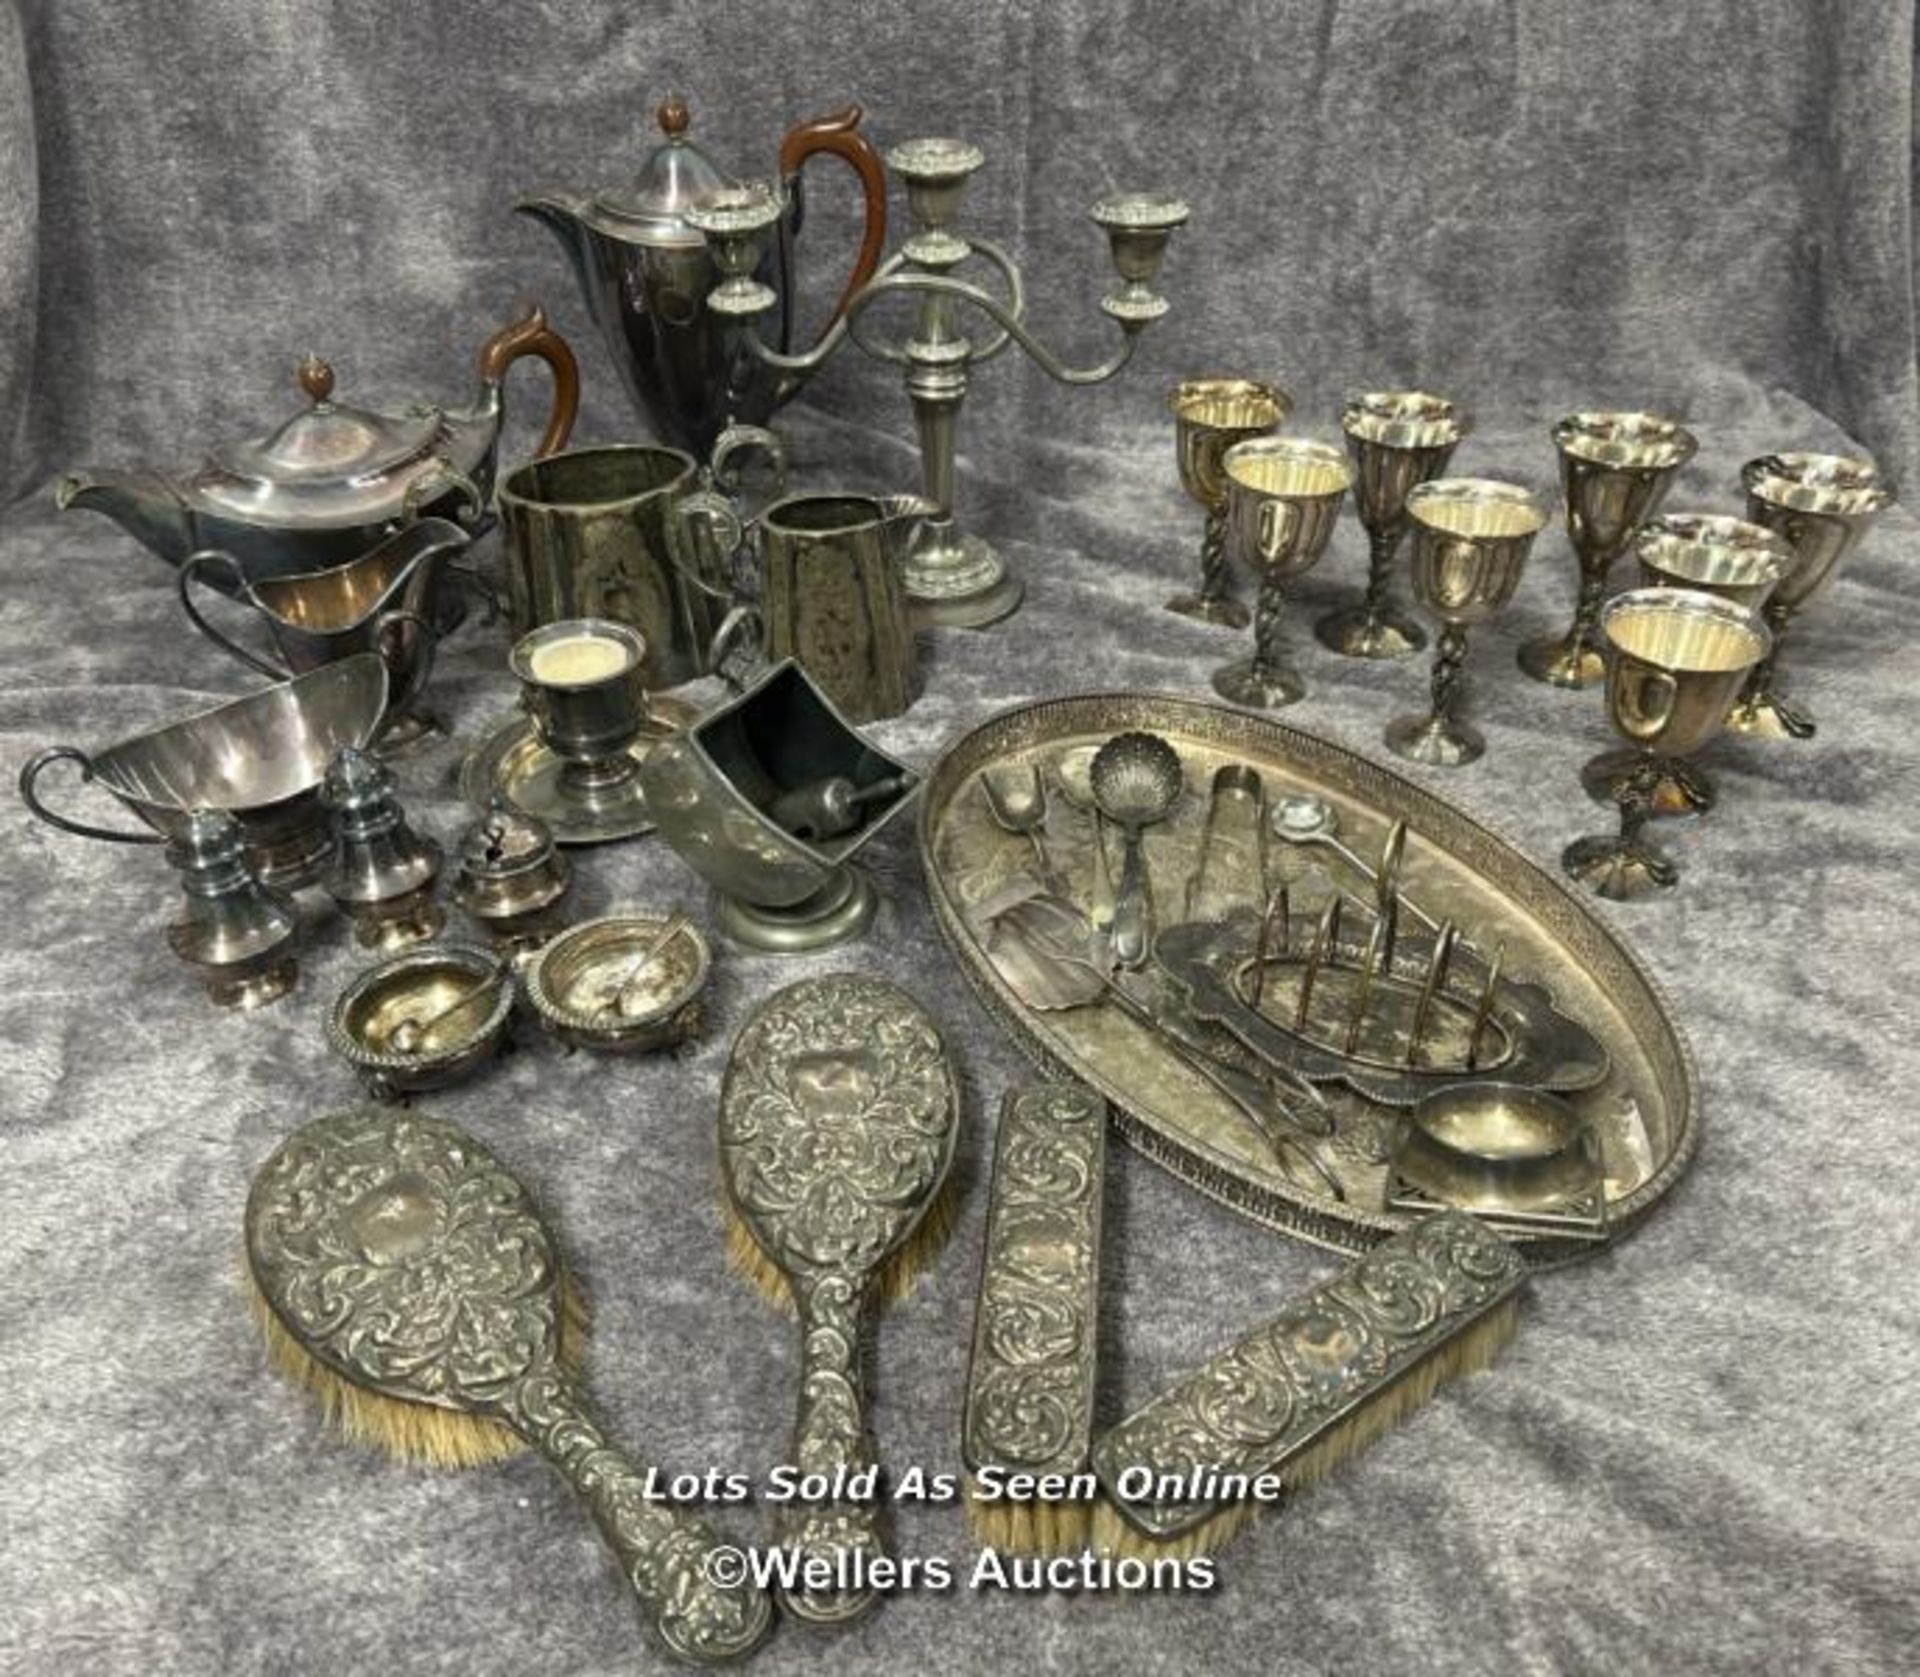 A large collection of antique metal plated items including a three armed candelabra, goblets,